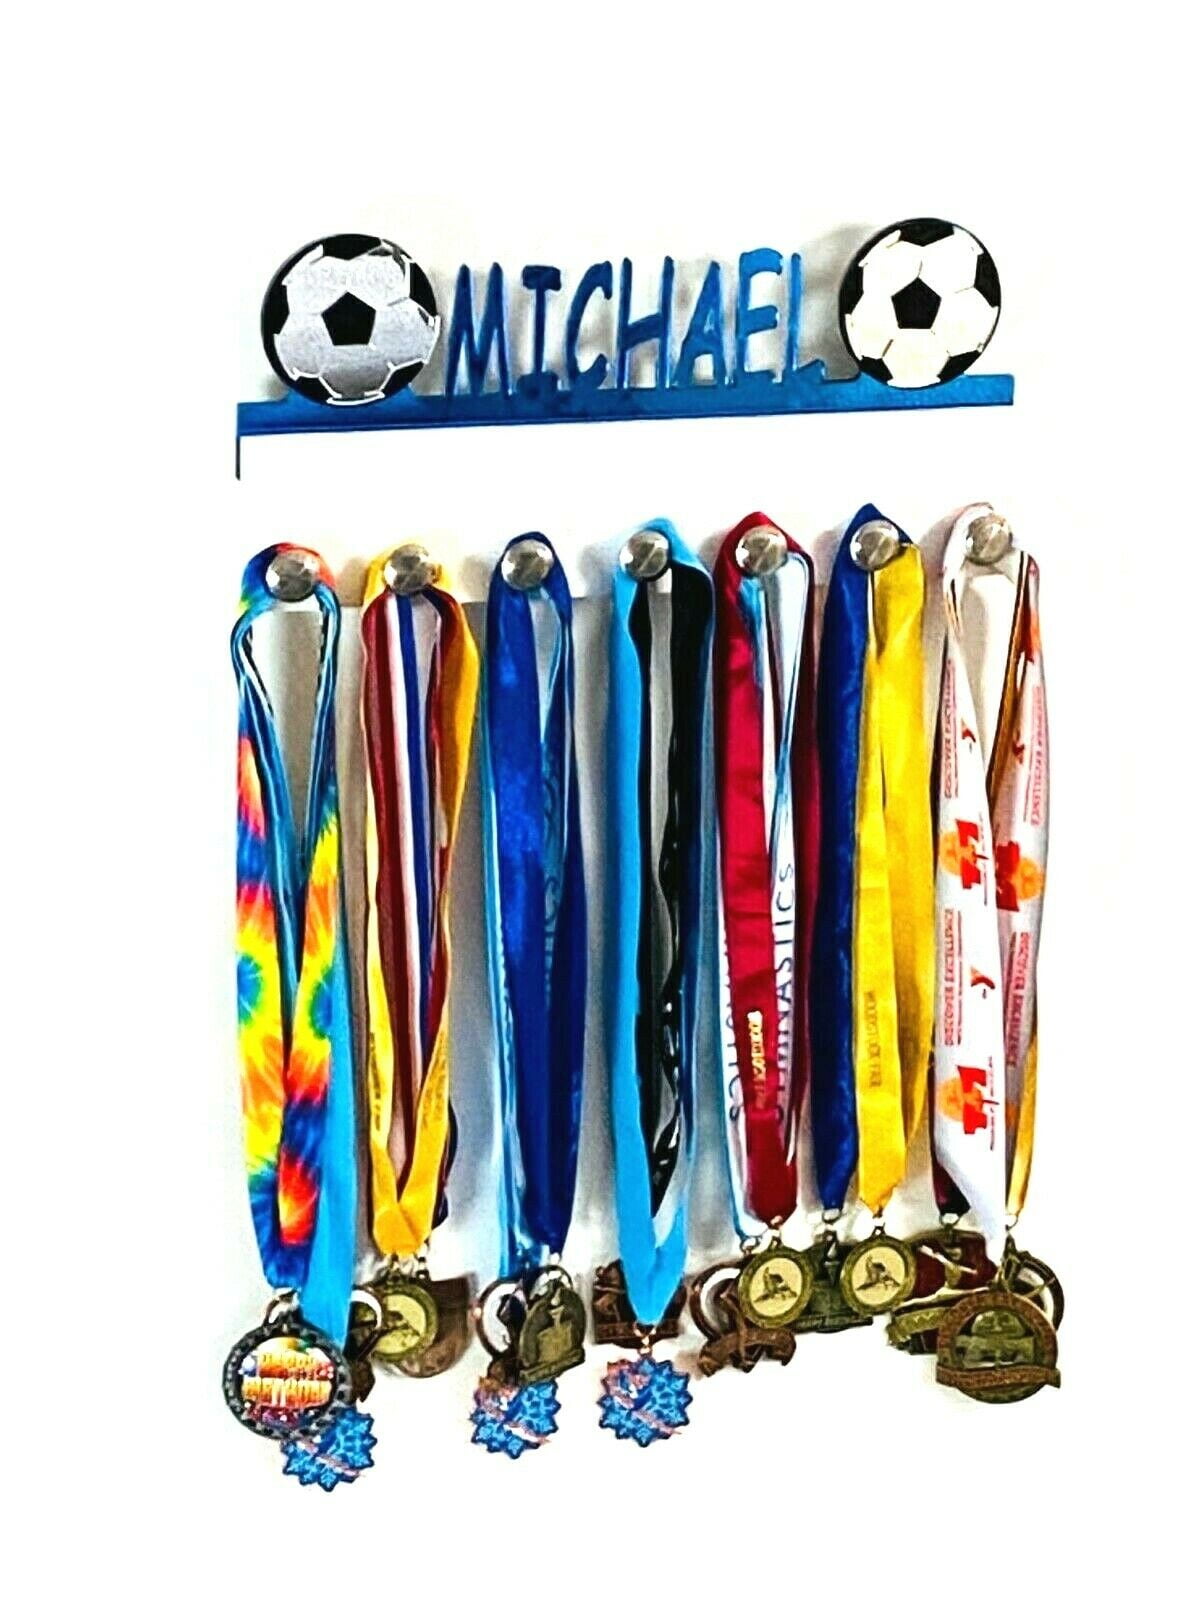 Custom Personalized Name Medal Holder Volleyball Award Wall Display Hook Hanger 